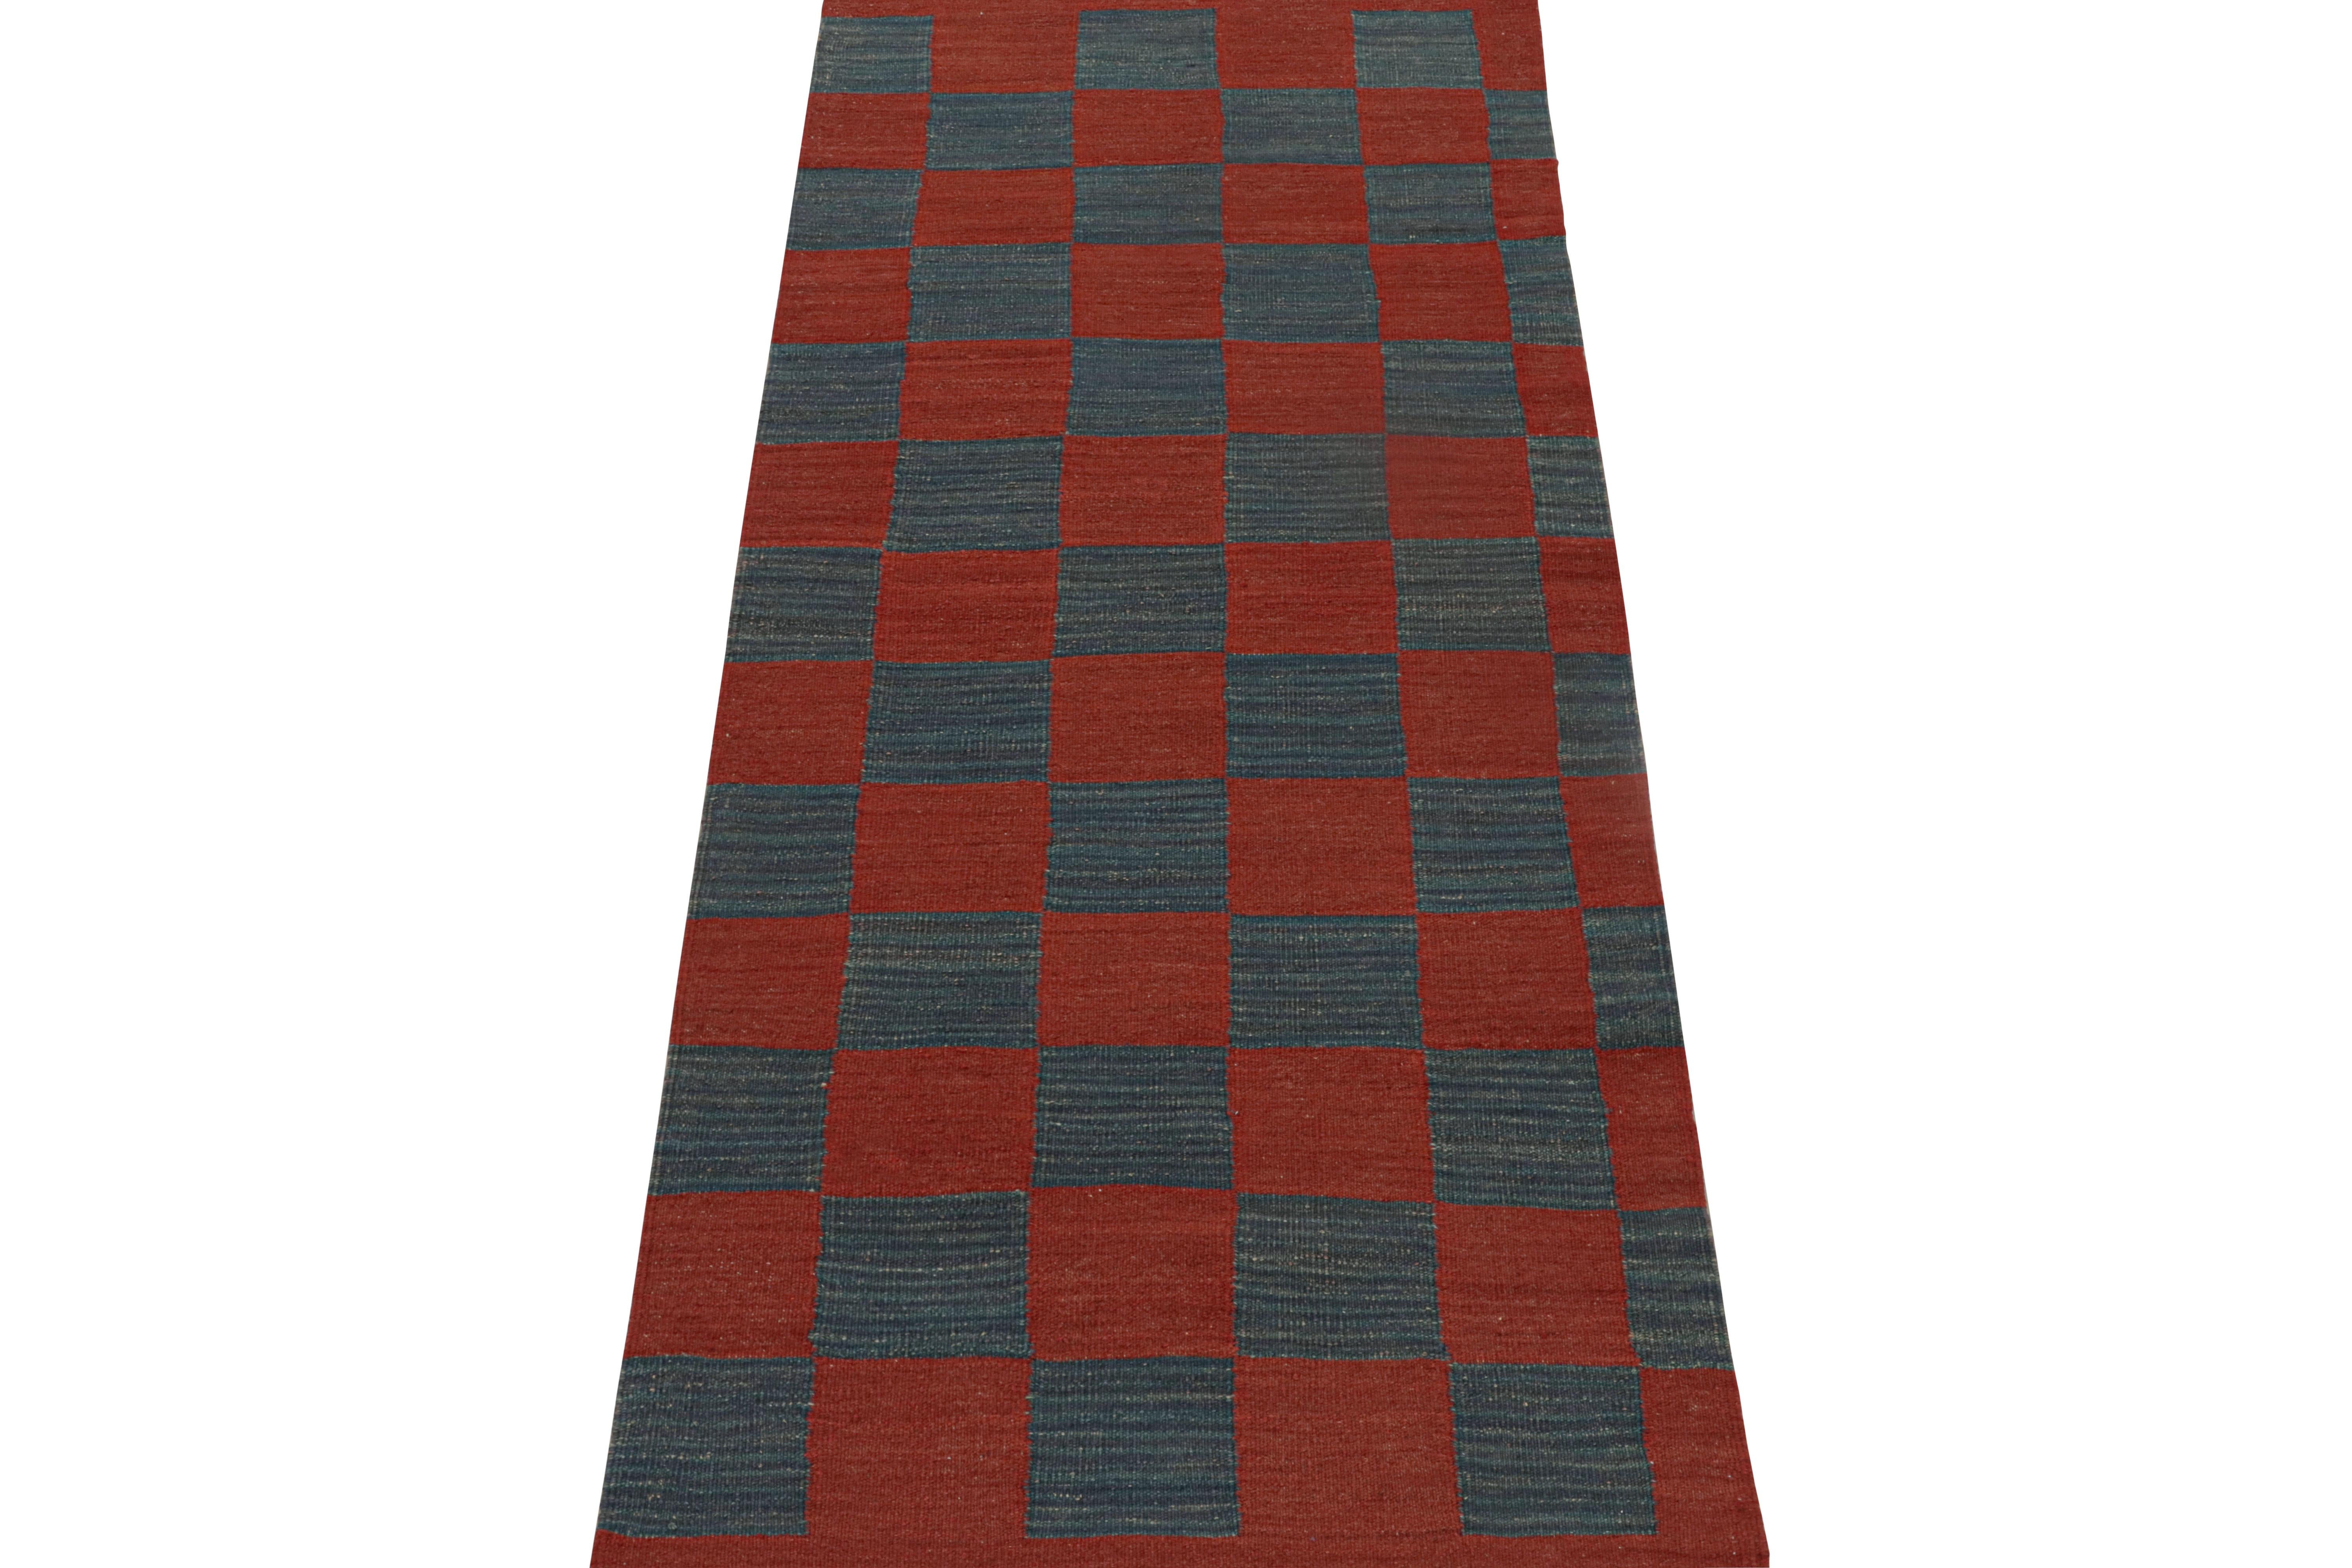 This vintage 3x8 Persian kilim is believed to be a midcentury tribal runner, handwoven in wool circa 1950-1960. 

Its design enjoys geometric patterns in a checkerboard style with rich red and navy blue colorways. The look is one of playful,